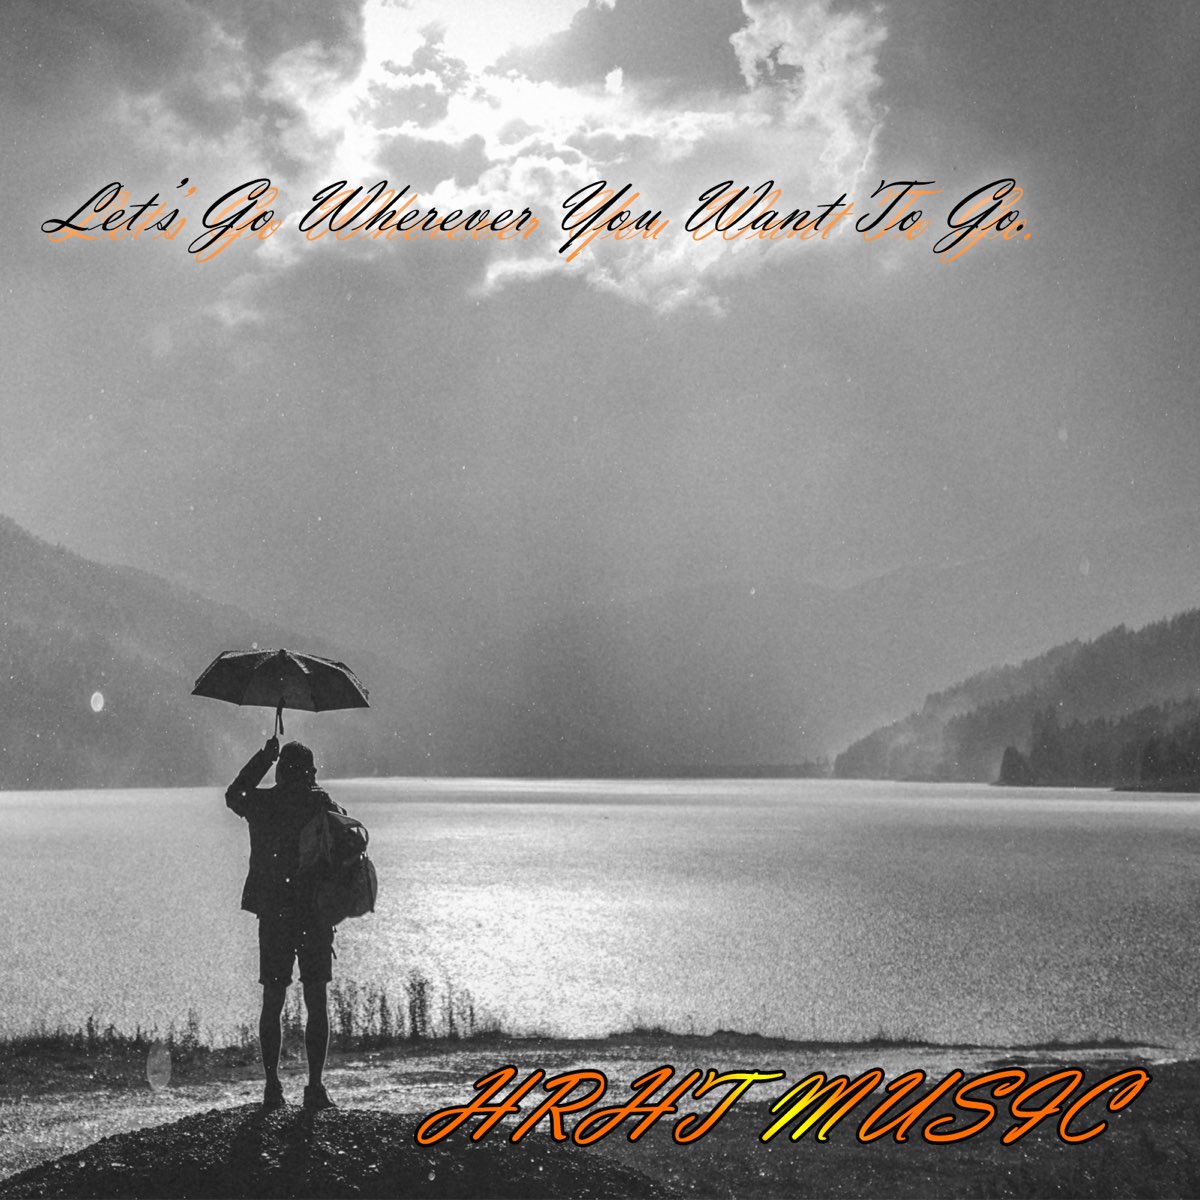 Let's go wherever you want to go. - Single - Album by HRHT MUSIC 